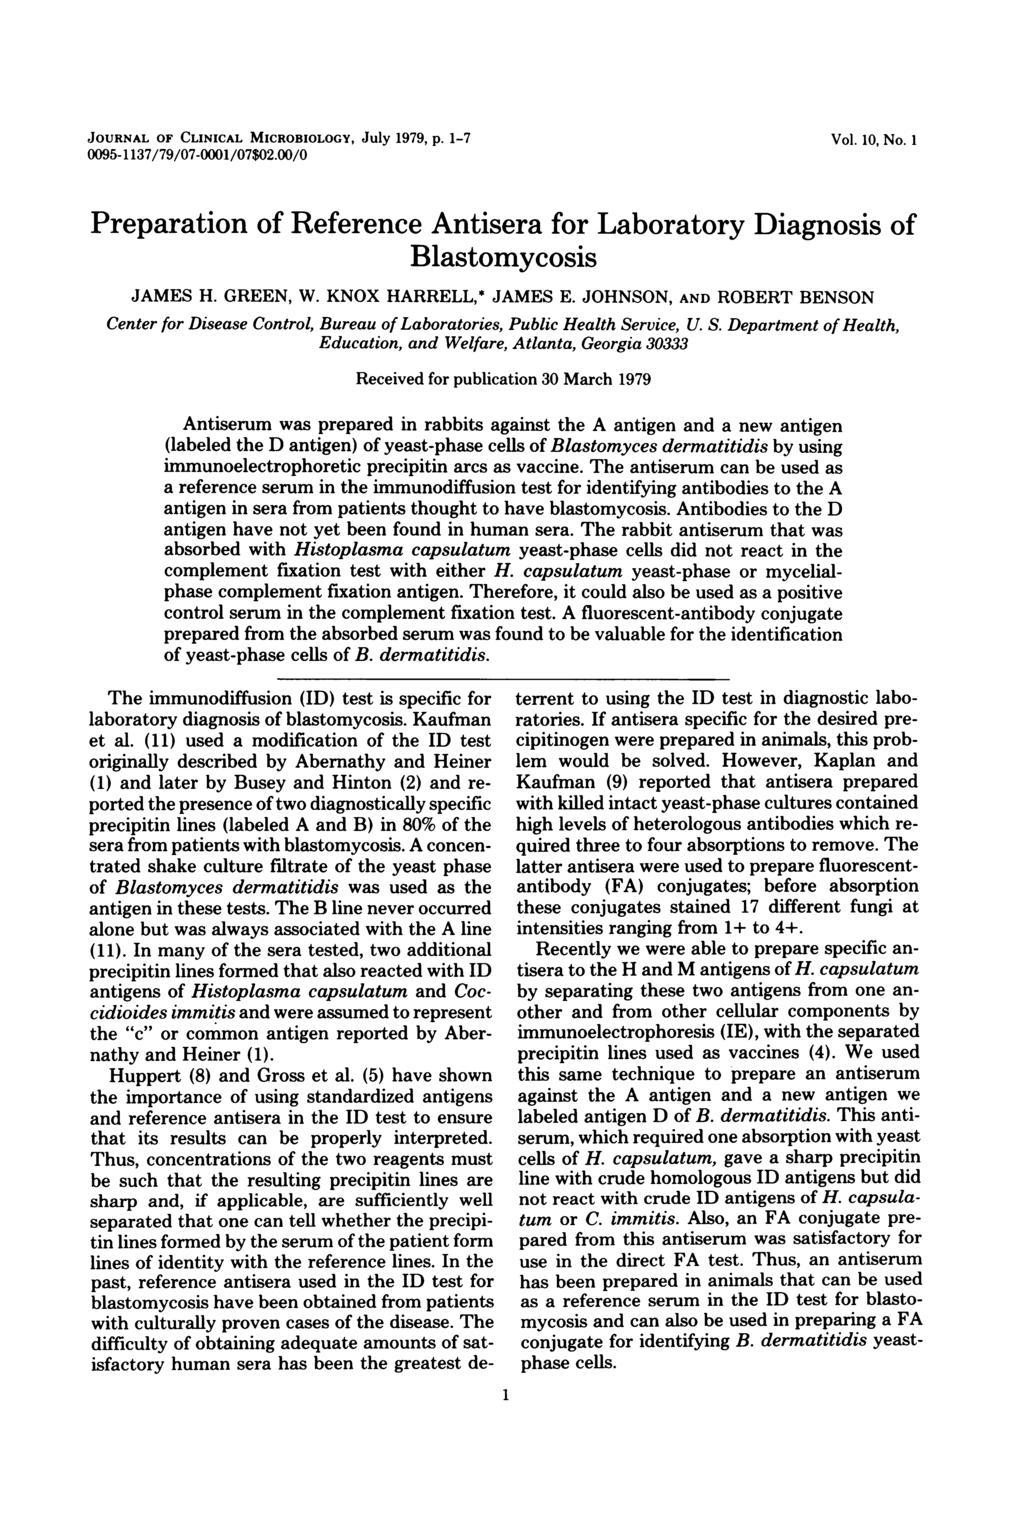 JOURNAL OF CLINICAL MICROBIOLOGY, July 1979, p. 1-7 0095-1137/79/07-0001/07$02.00/0 Vol. 10, No. 1 Preparation of Reference Antisera for Laboratory Diagnosis of Blastomycosis JAMES H. GREEN, W.